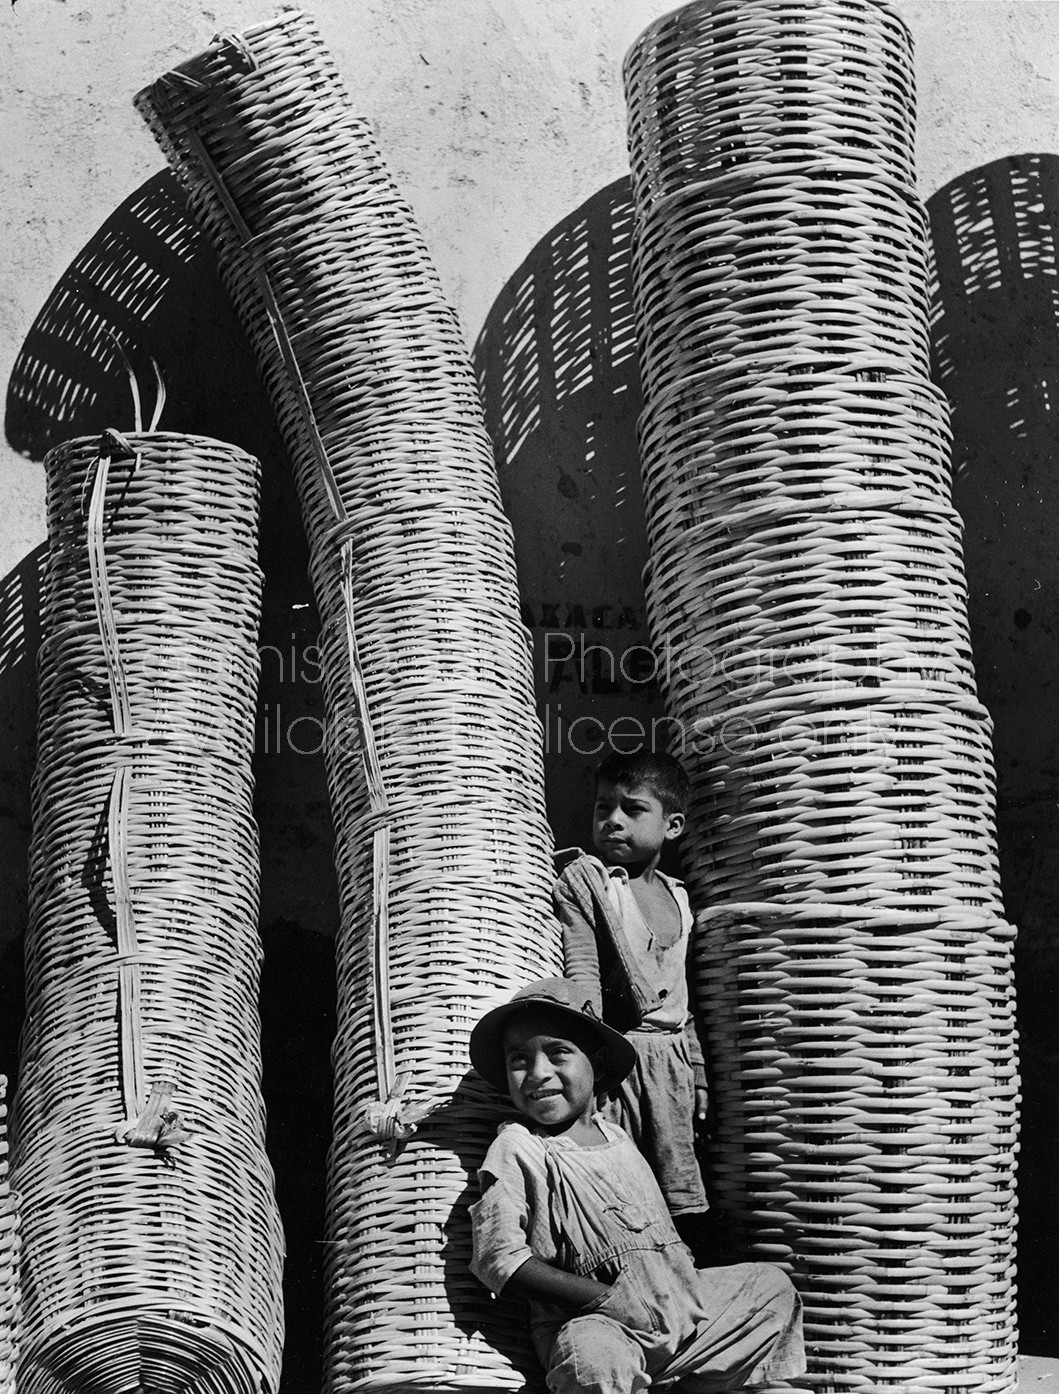 Two children standing amongst stacks of baskets in Mexico.